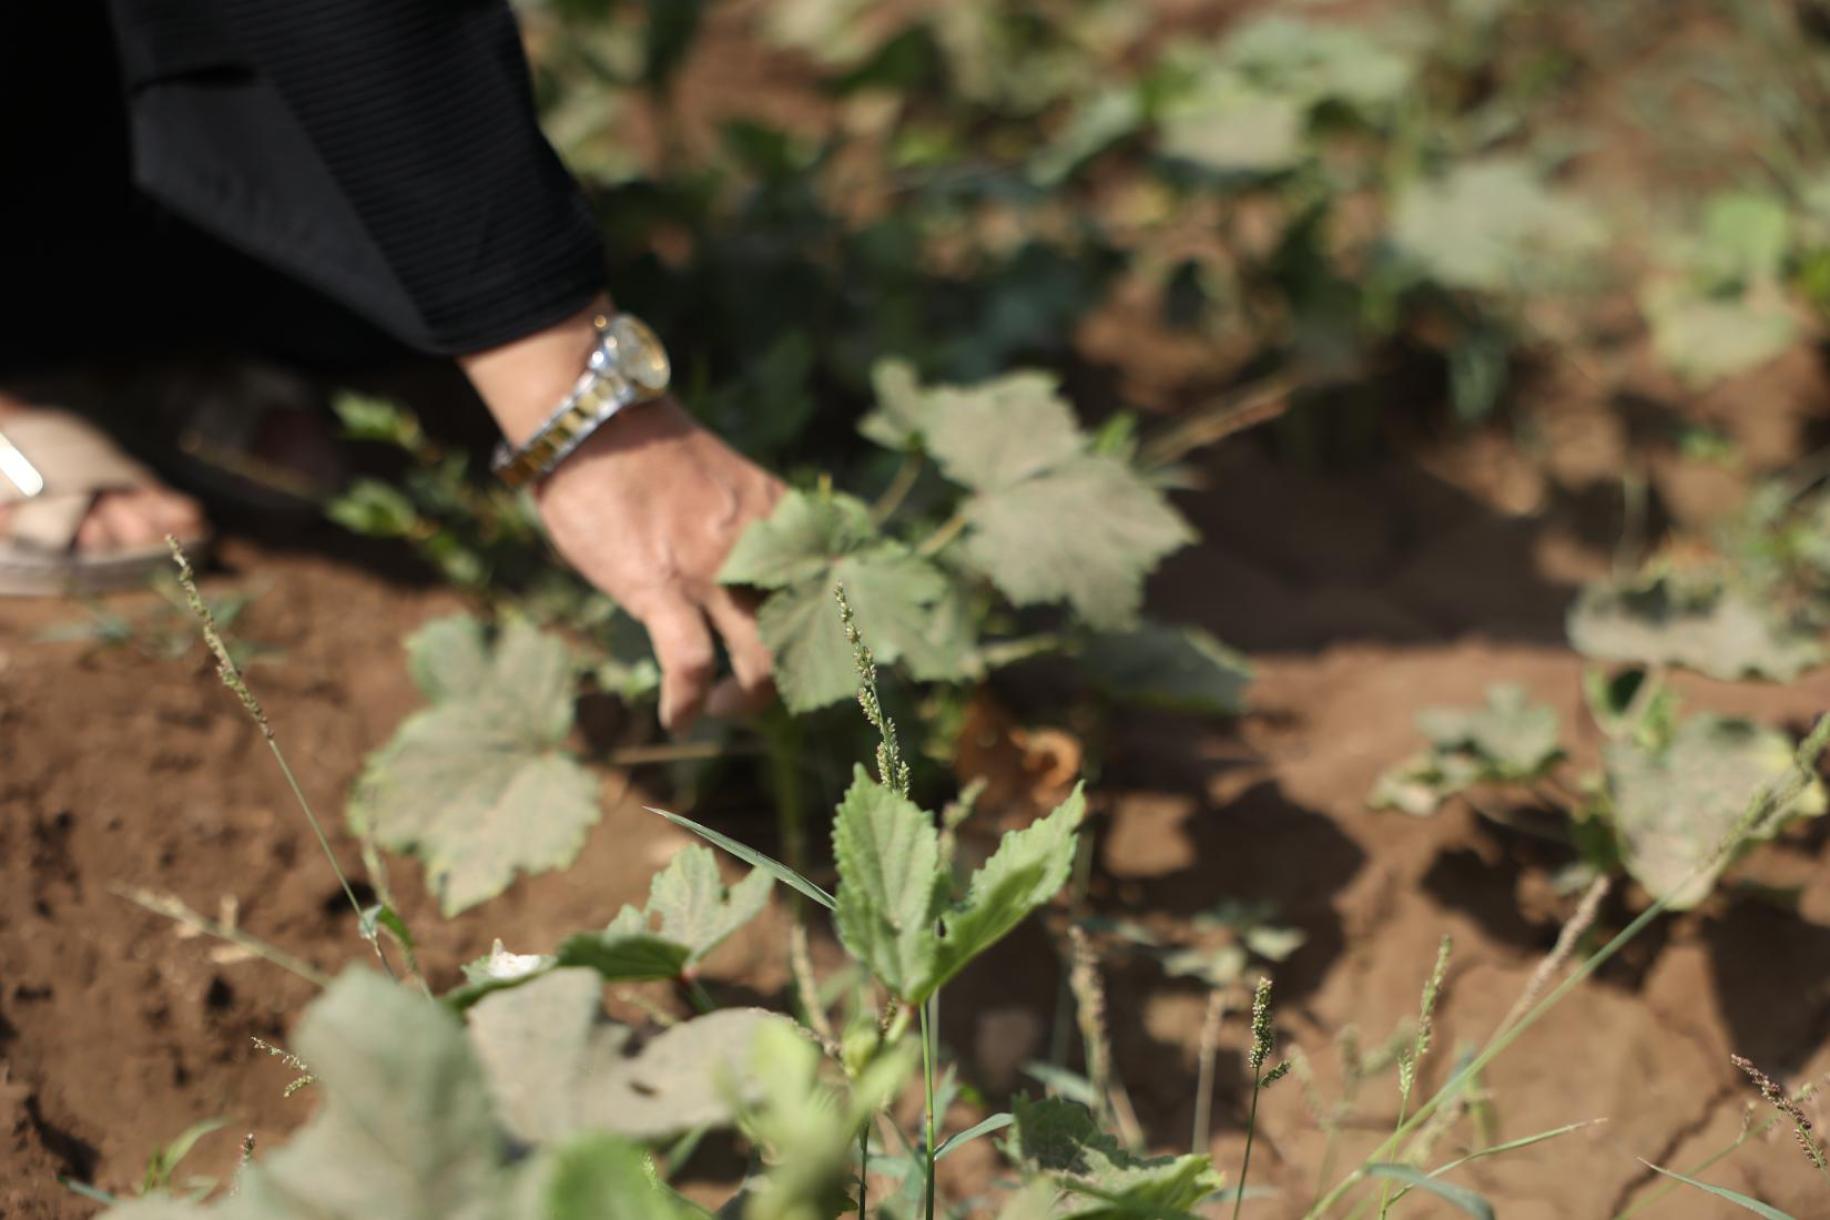 Close-up of a woman's hand tending her crops.